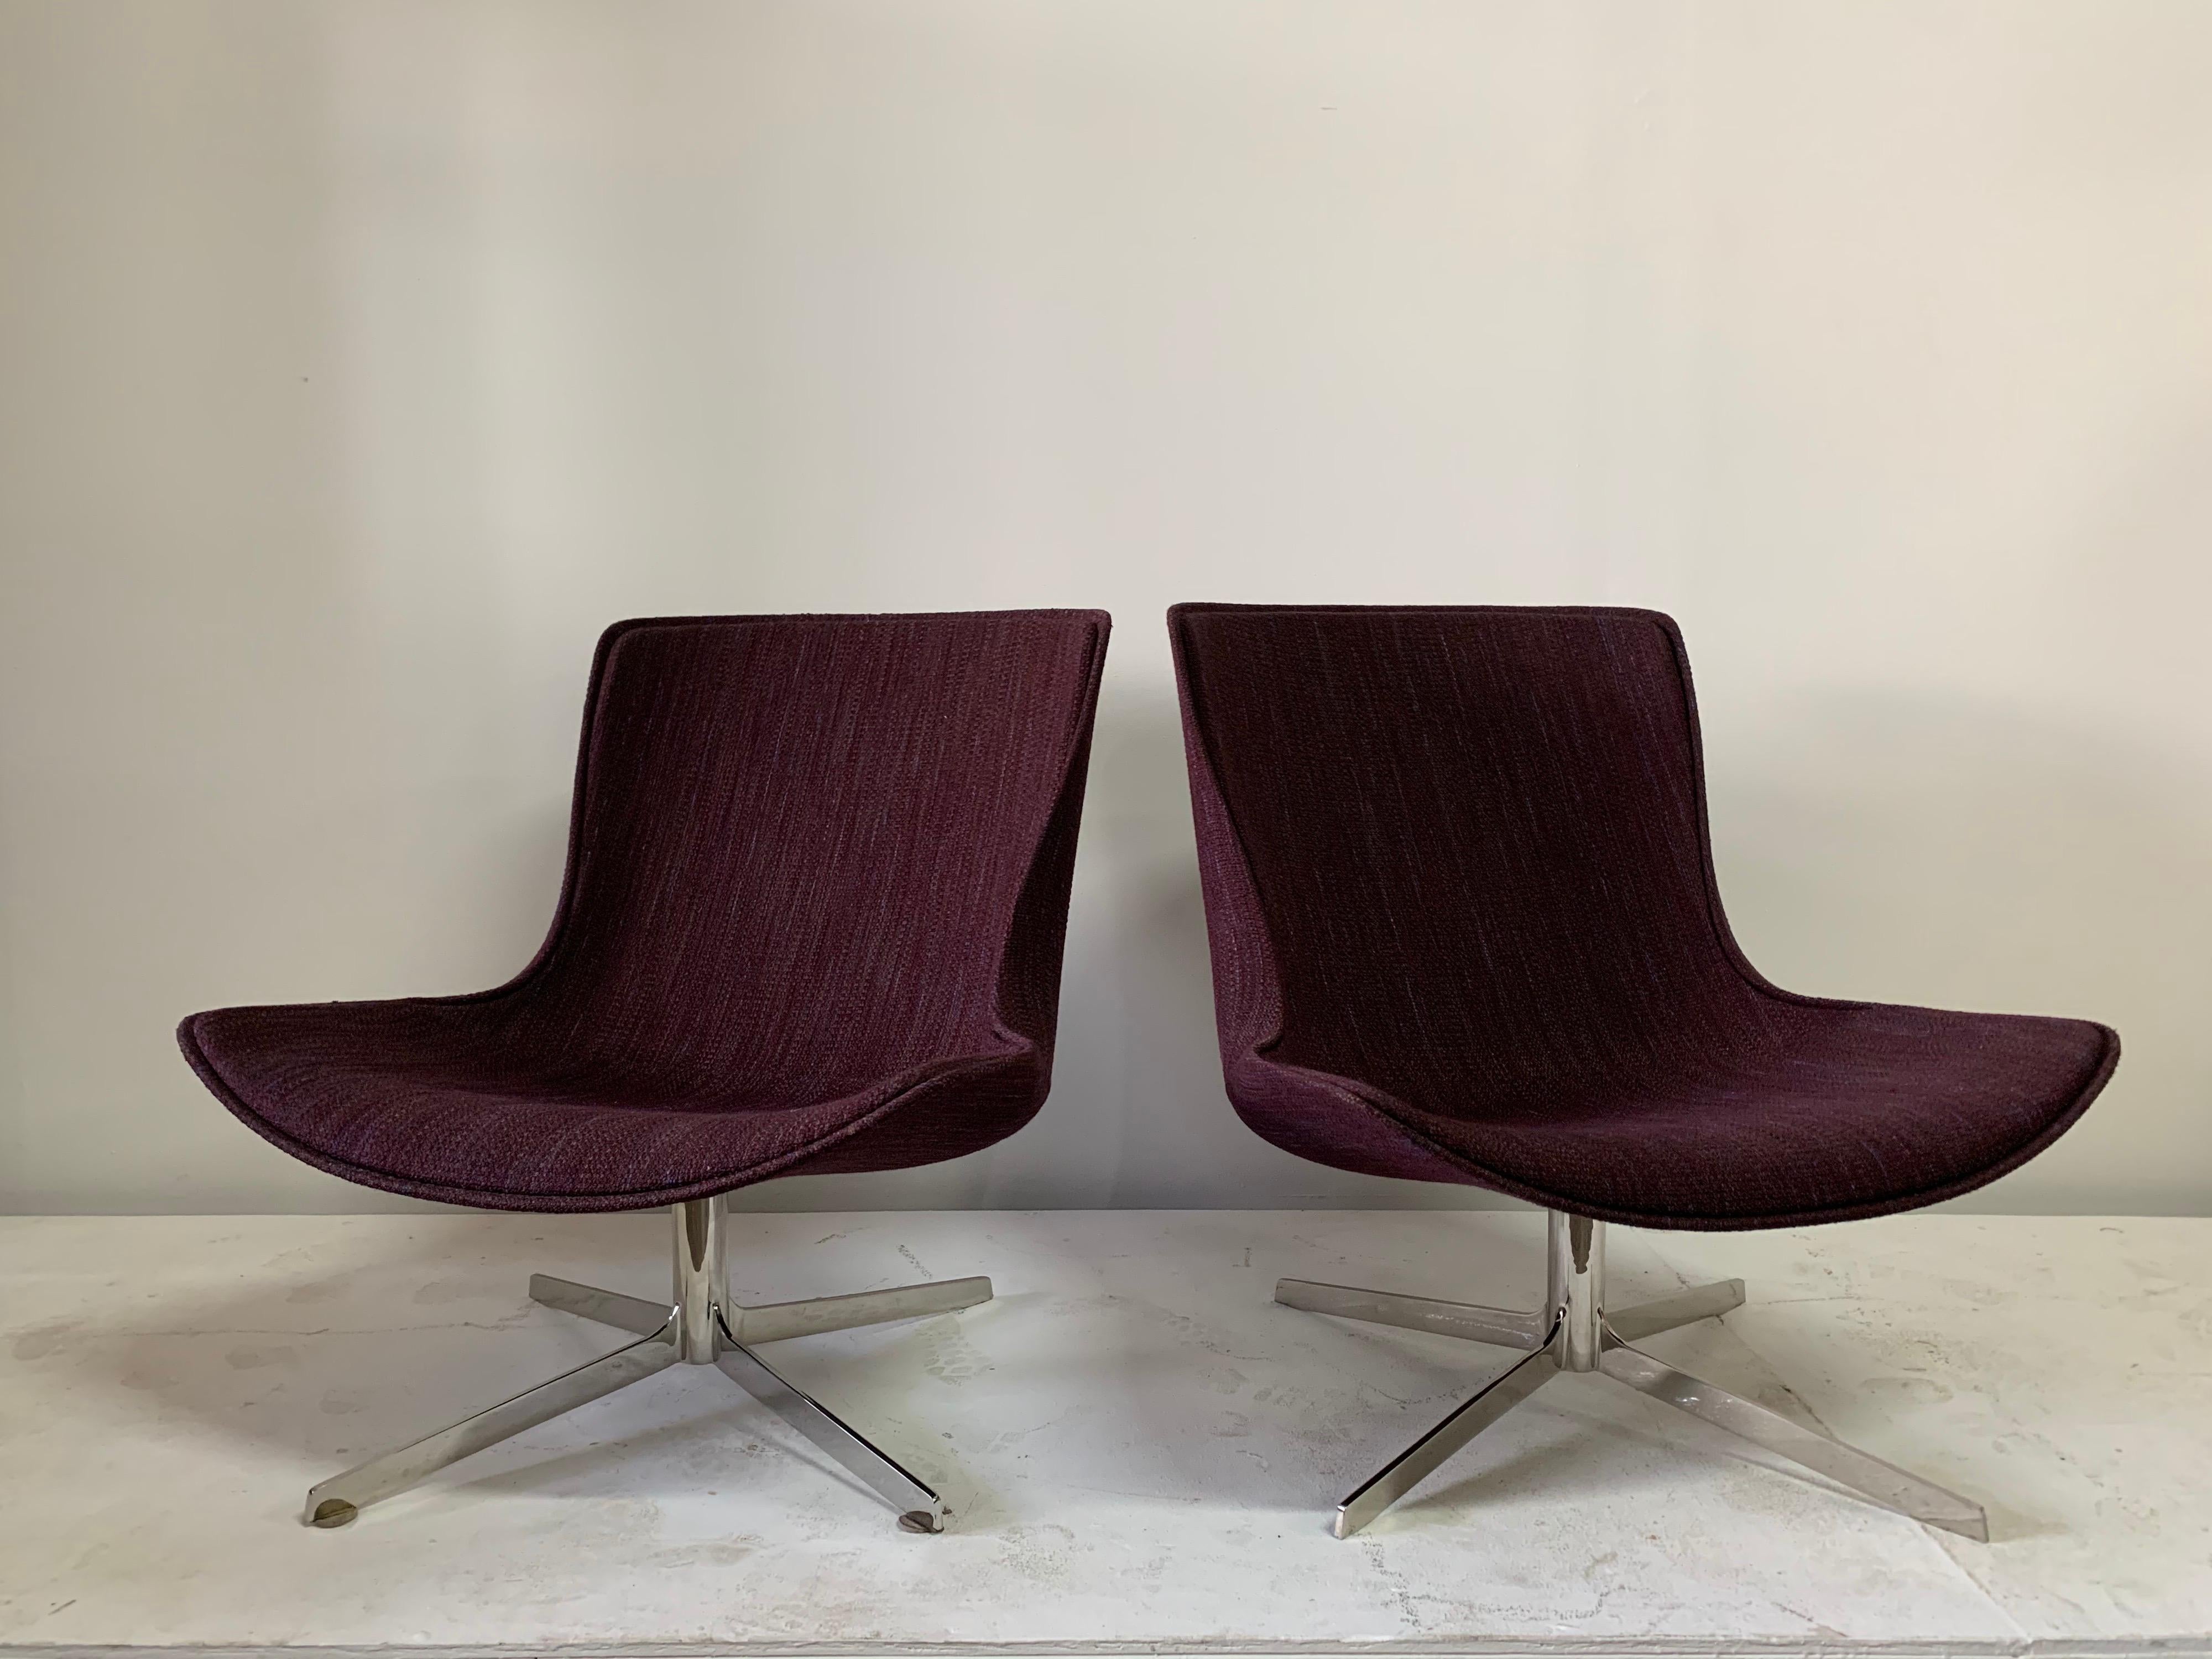 In the original eggplant fabric and with the most beautiful curves design, these Zographos style swivel lounge chairs on stainless steel base. They are ready to use and very comfortable with full 360 swivel. Very high quality and craftsmanship.